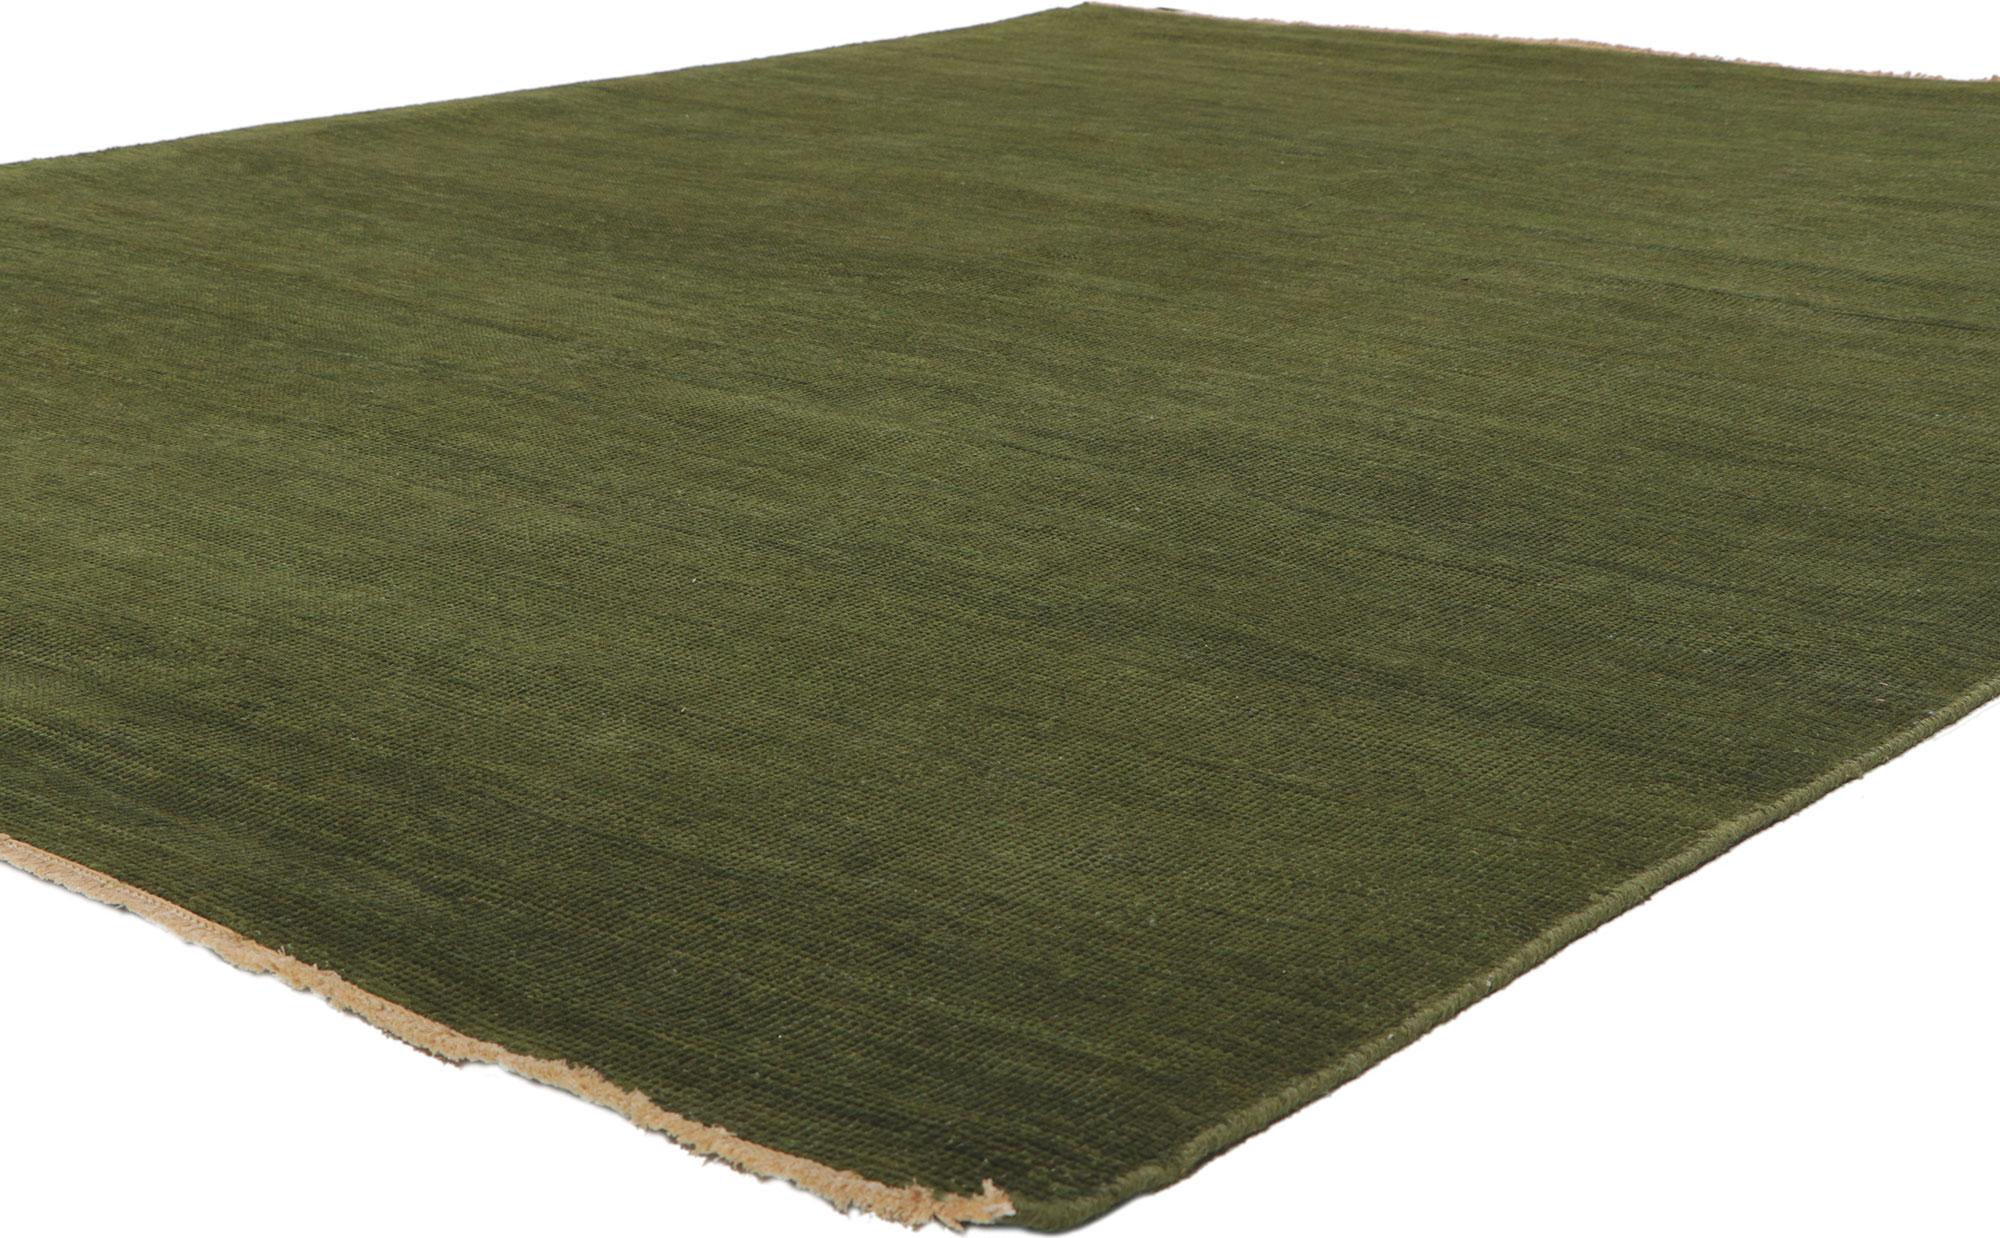 30860 New Earthy Modern Area rug with Biophilic Design, 08'01 x 10'00. Effortless, elegant, and casual meets the eye in this contemporary Indian area rug. It features greenish hues and softly gradated striations running selvage to selvage blending